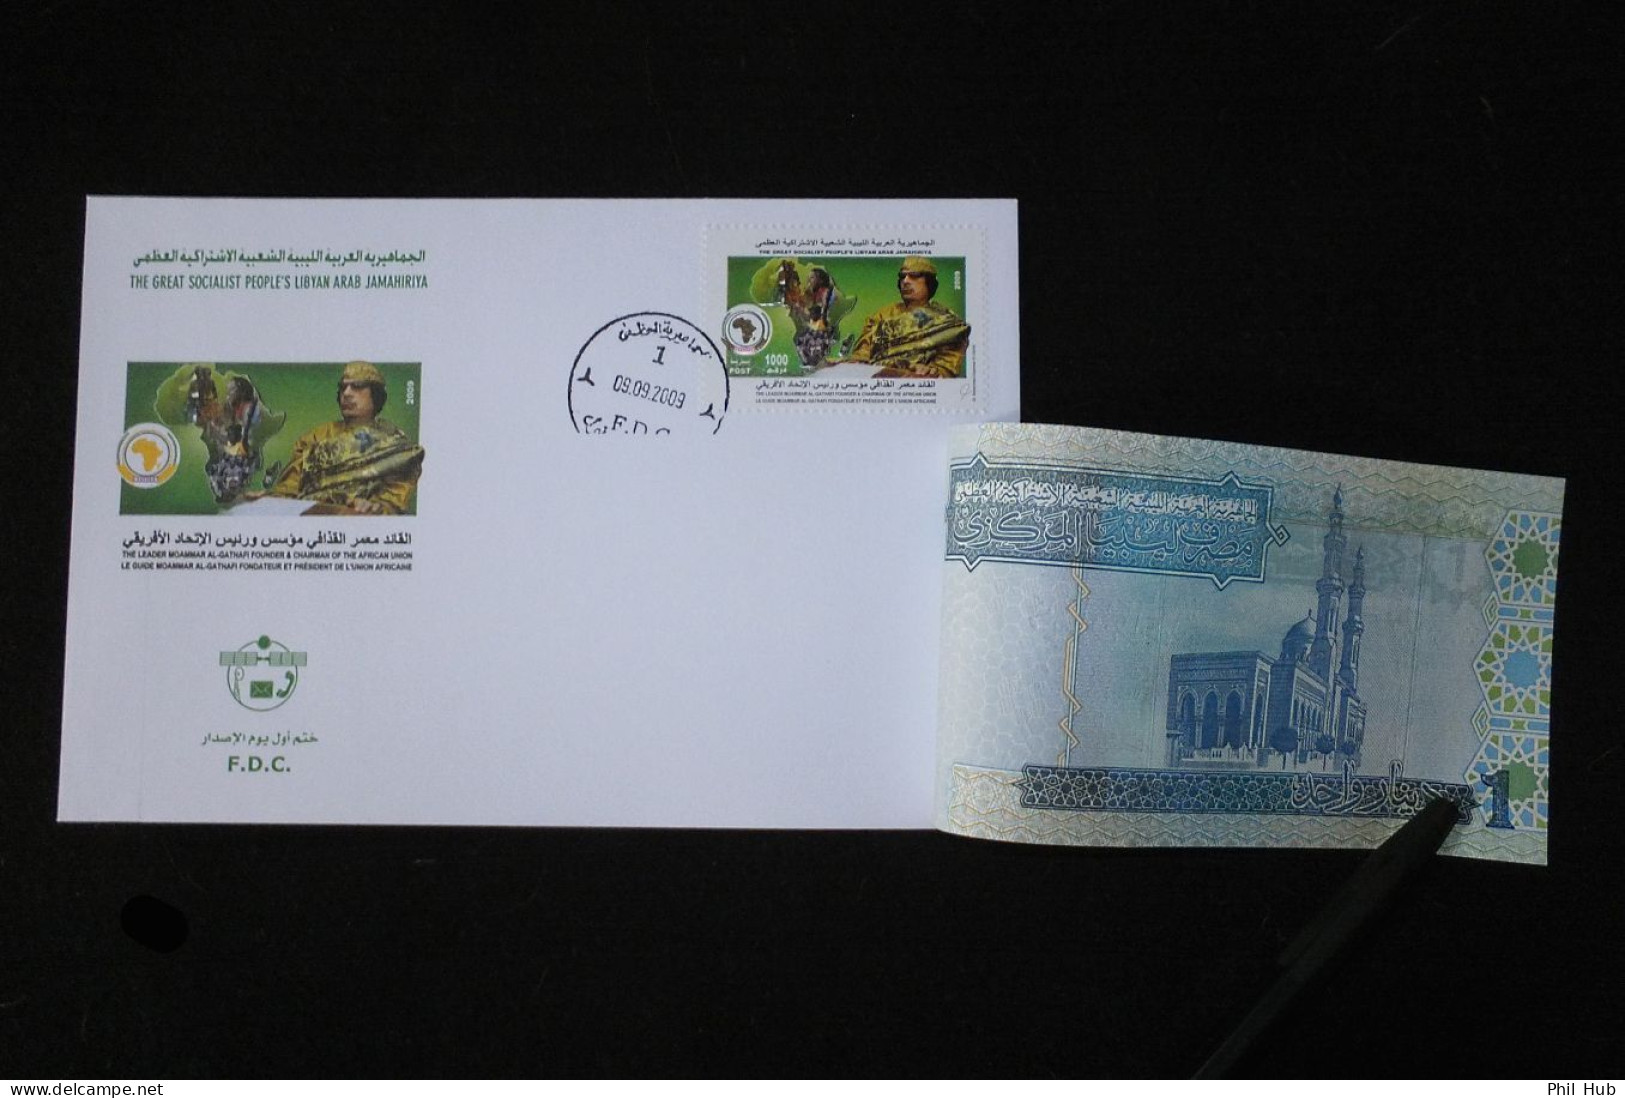 LIBYA 2009 "Gaddafi Africa Union Leader FDC" STAMP And BANKNOTE On FDC - Libyen